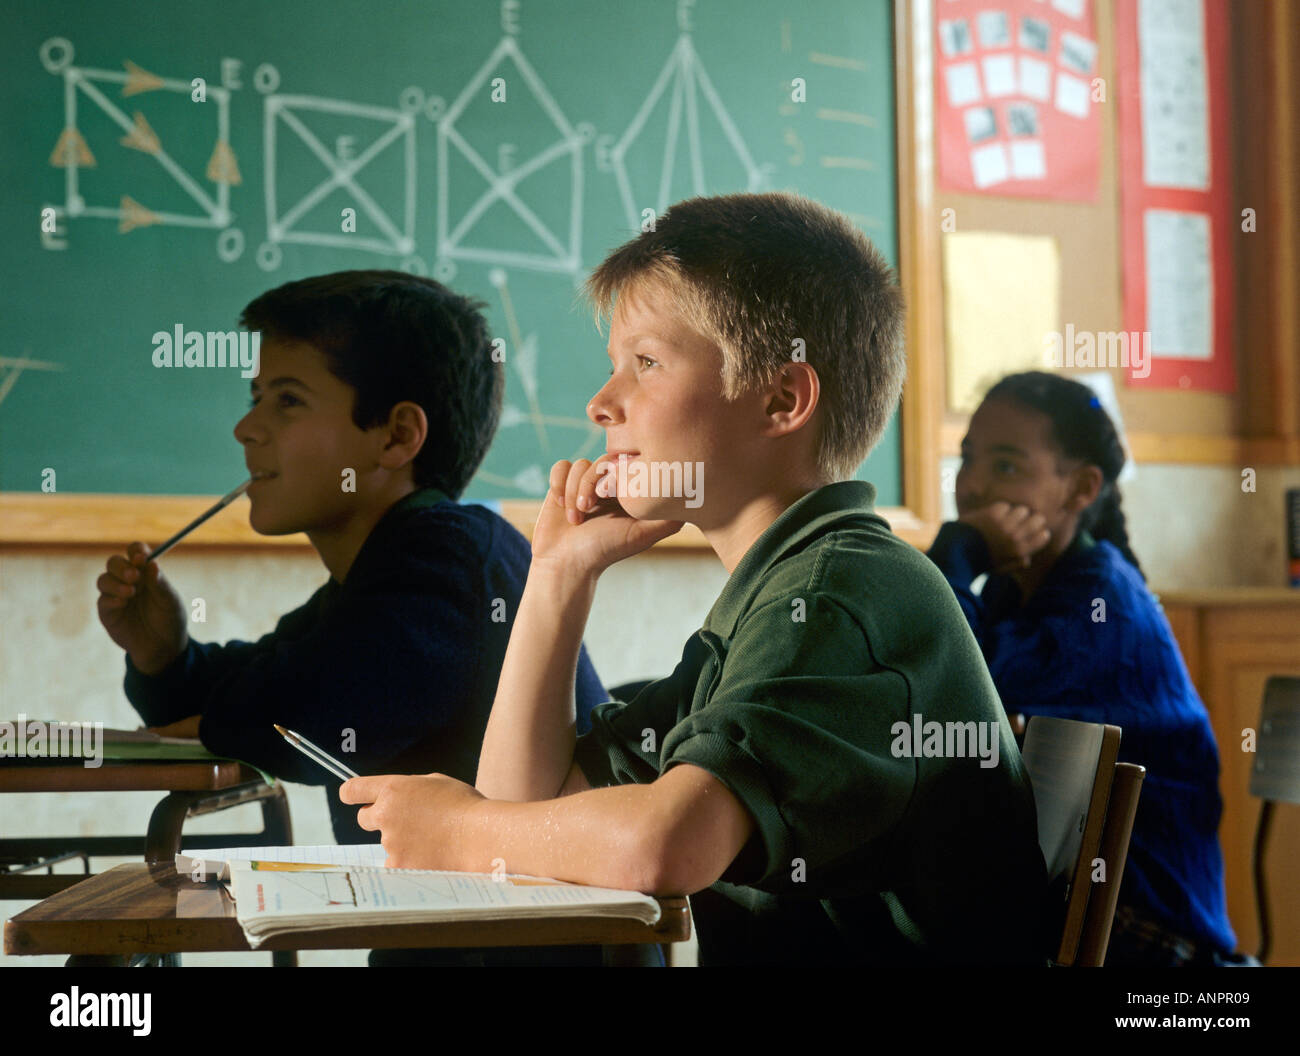 Boy (11-12) at desk,resting on elbow, geometry diagrams on wall behind Stock Photo